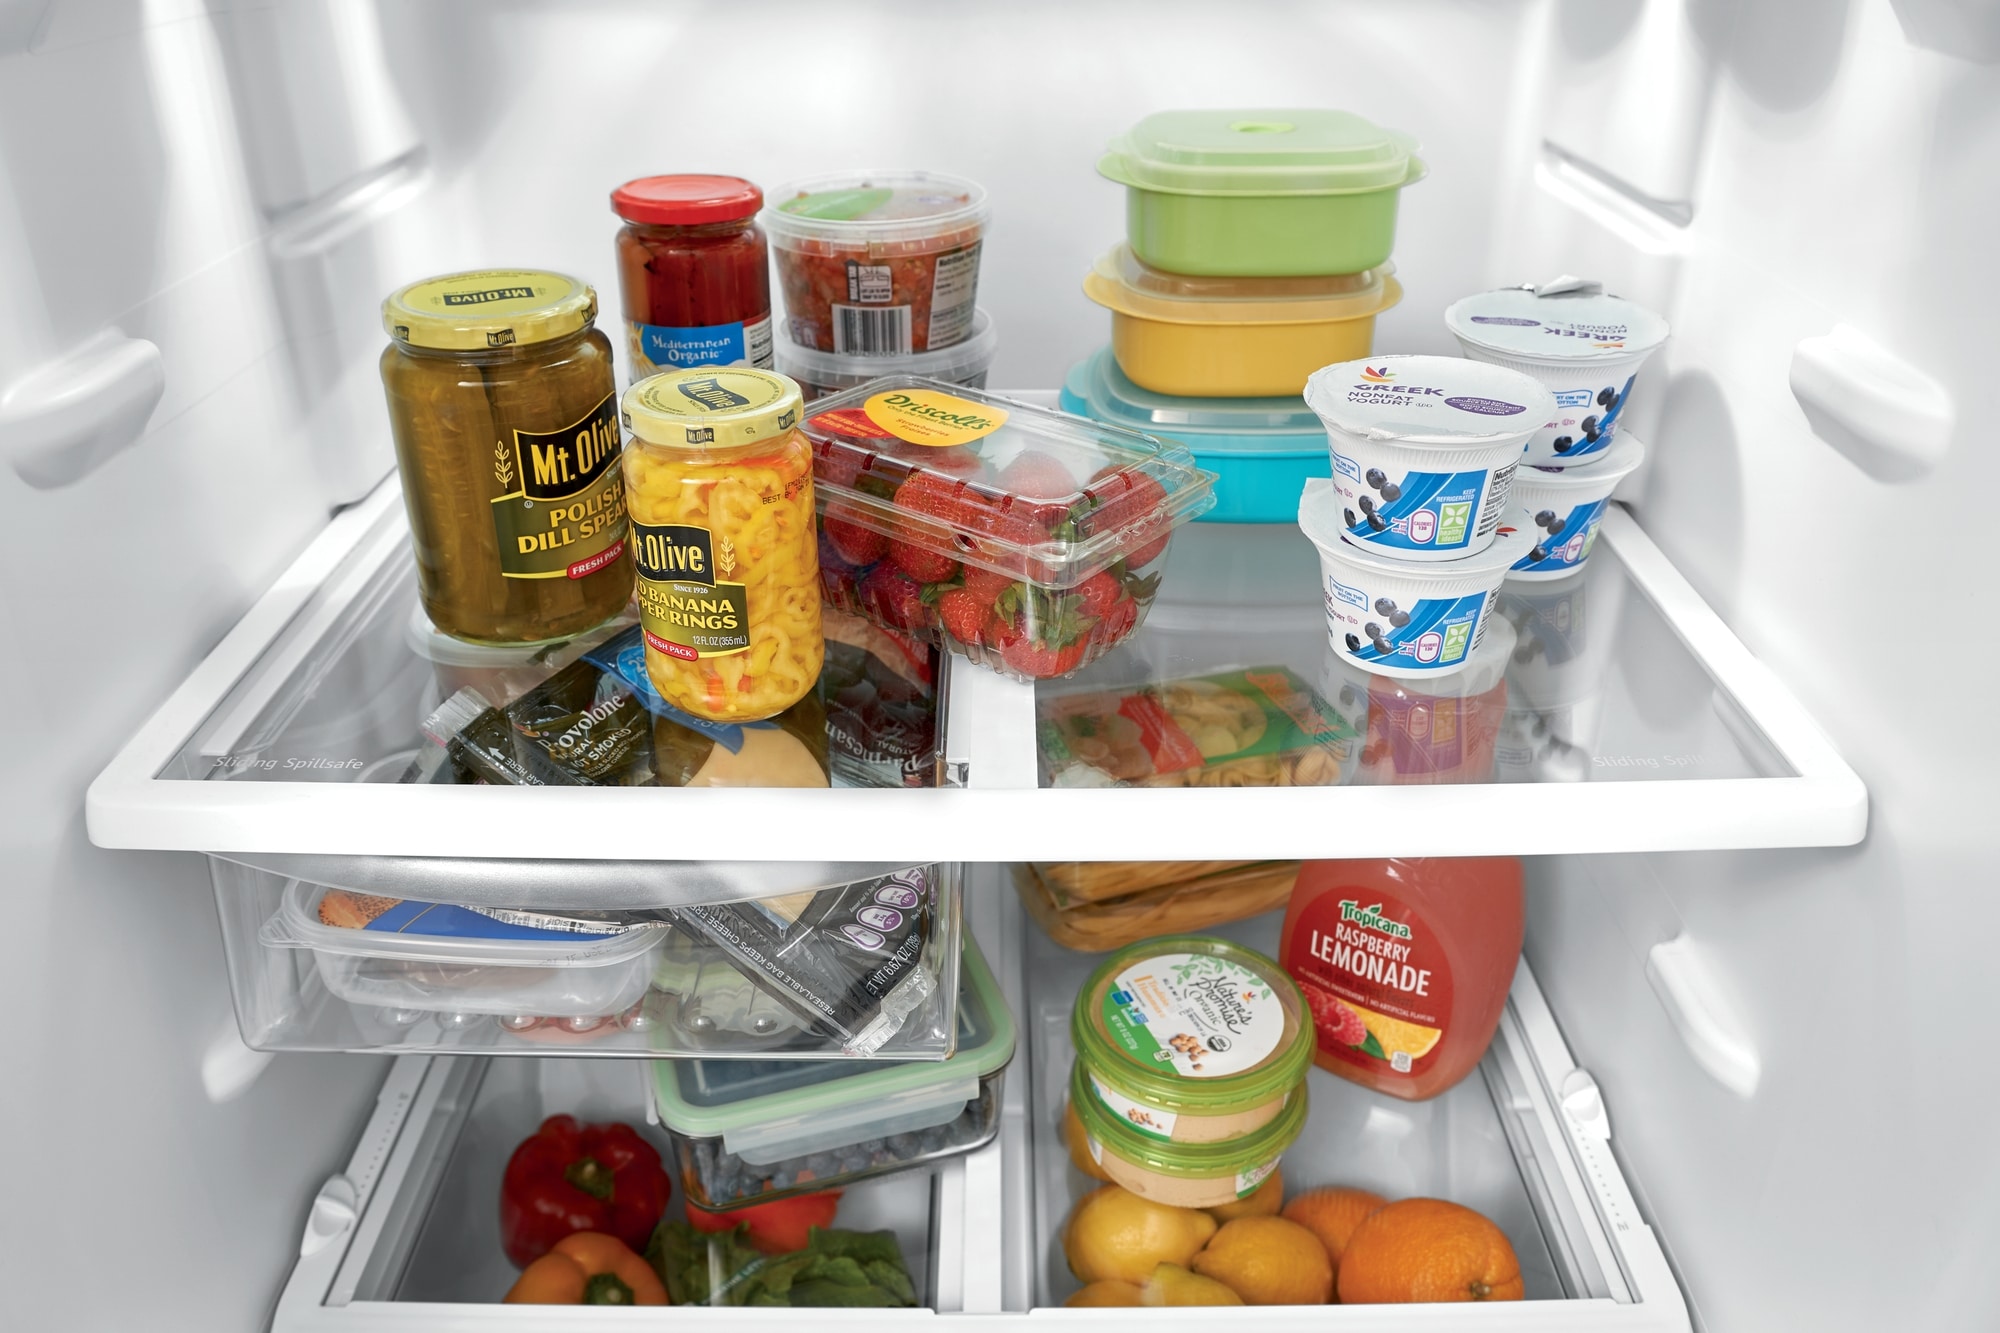 Refrigerator Food Storage Containers – METRO HOME GOODS